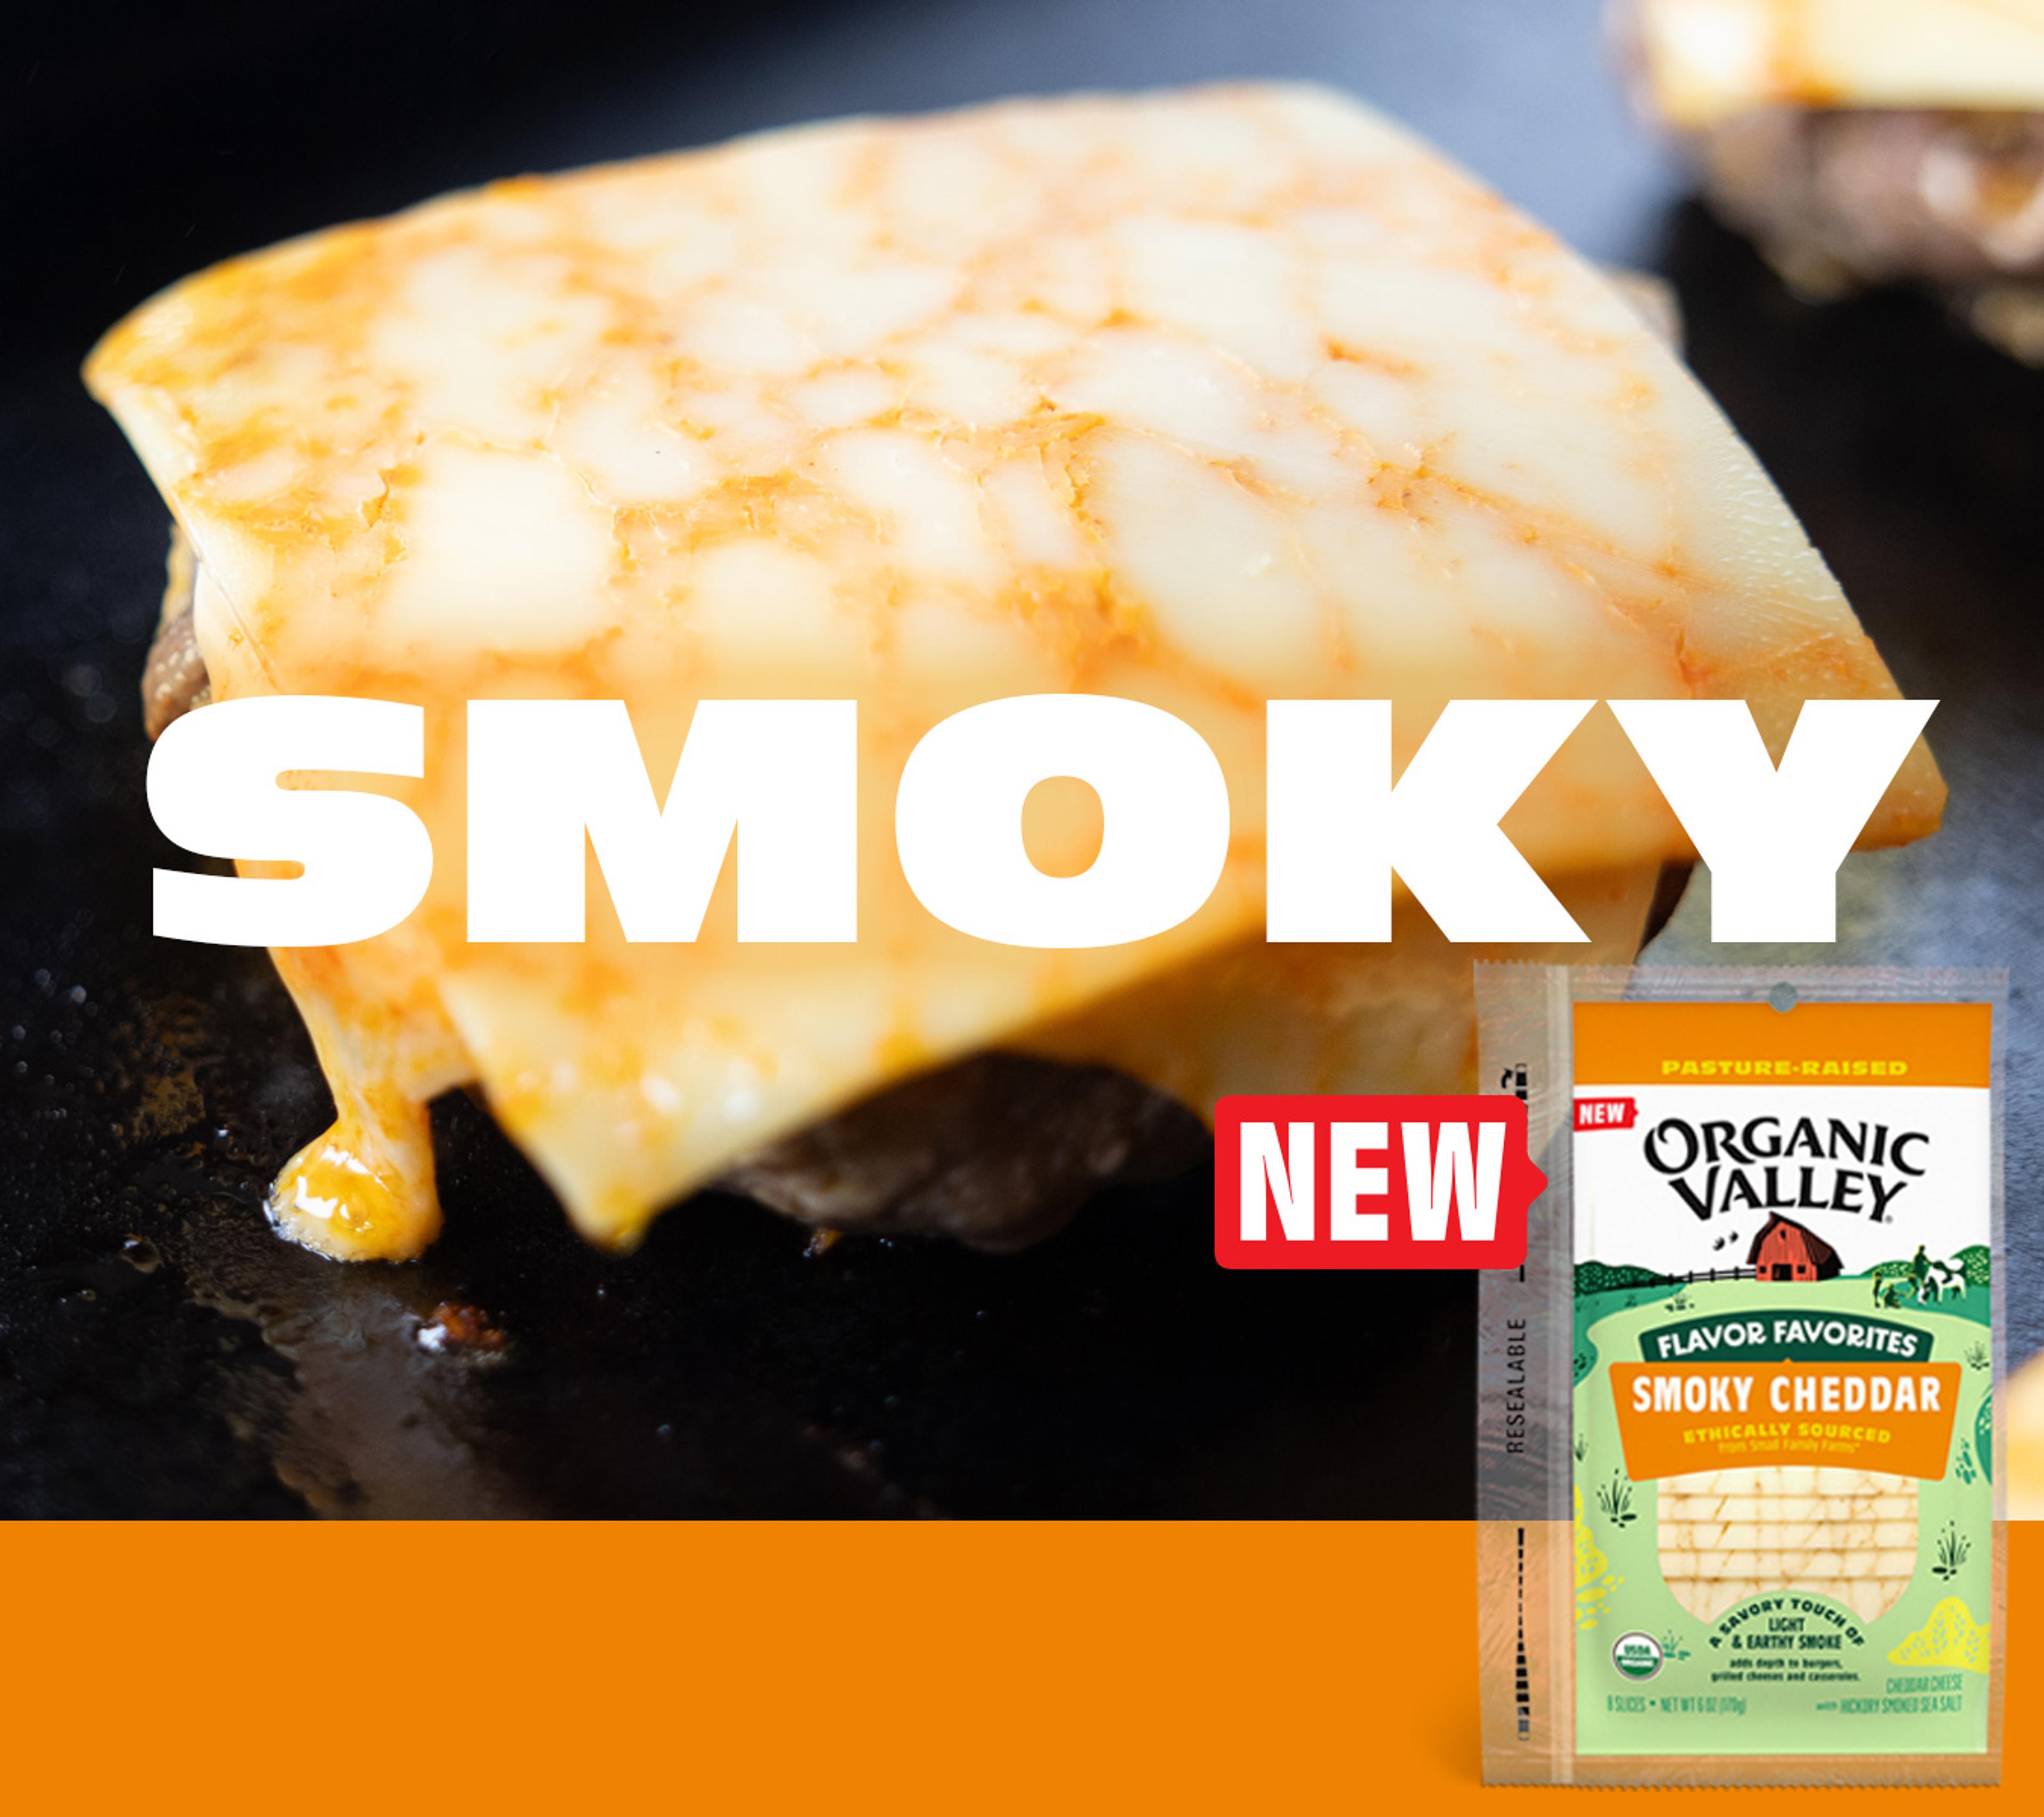 Organic Valley Smoky Cheddar cheese on top of a burger on the grill.